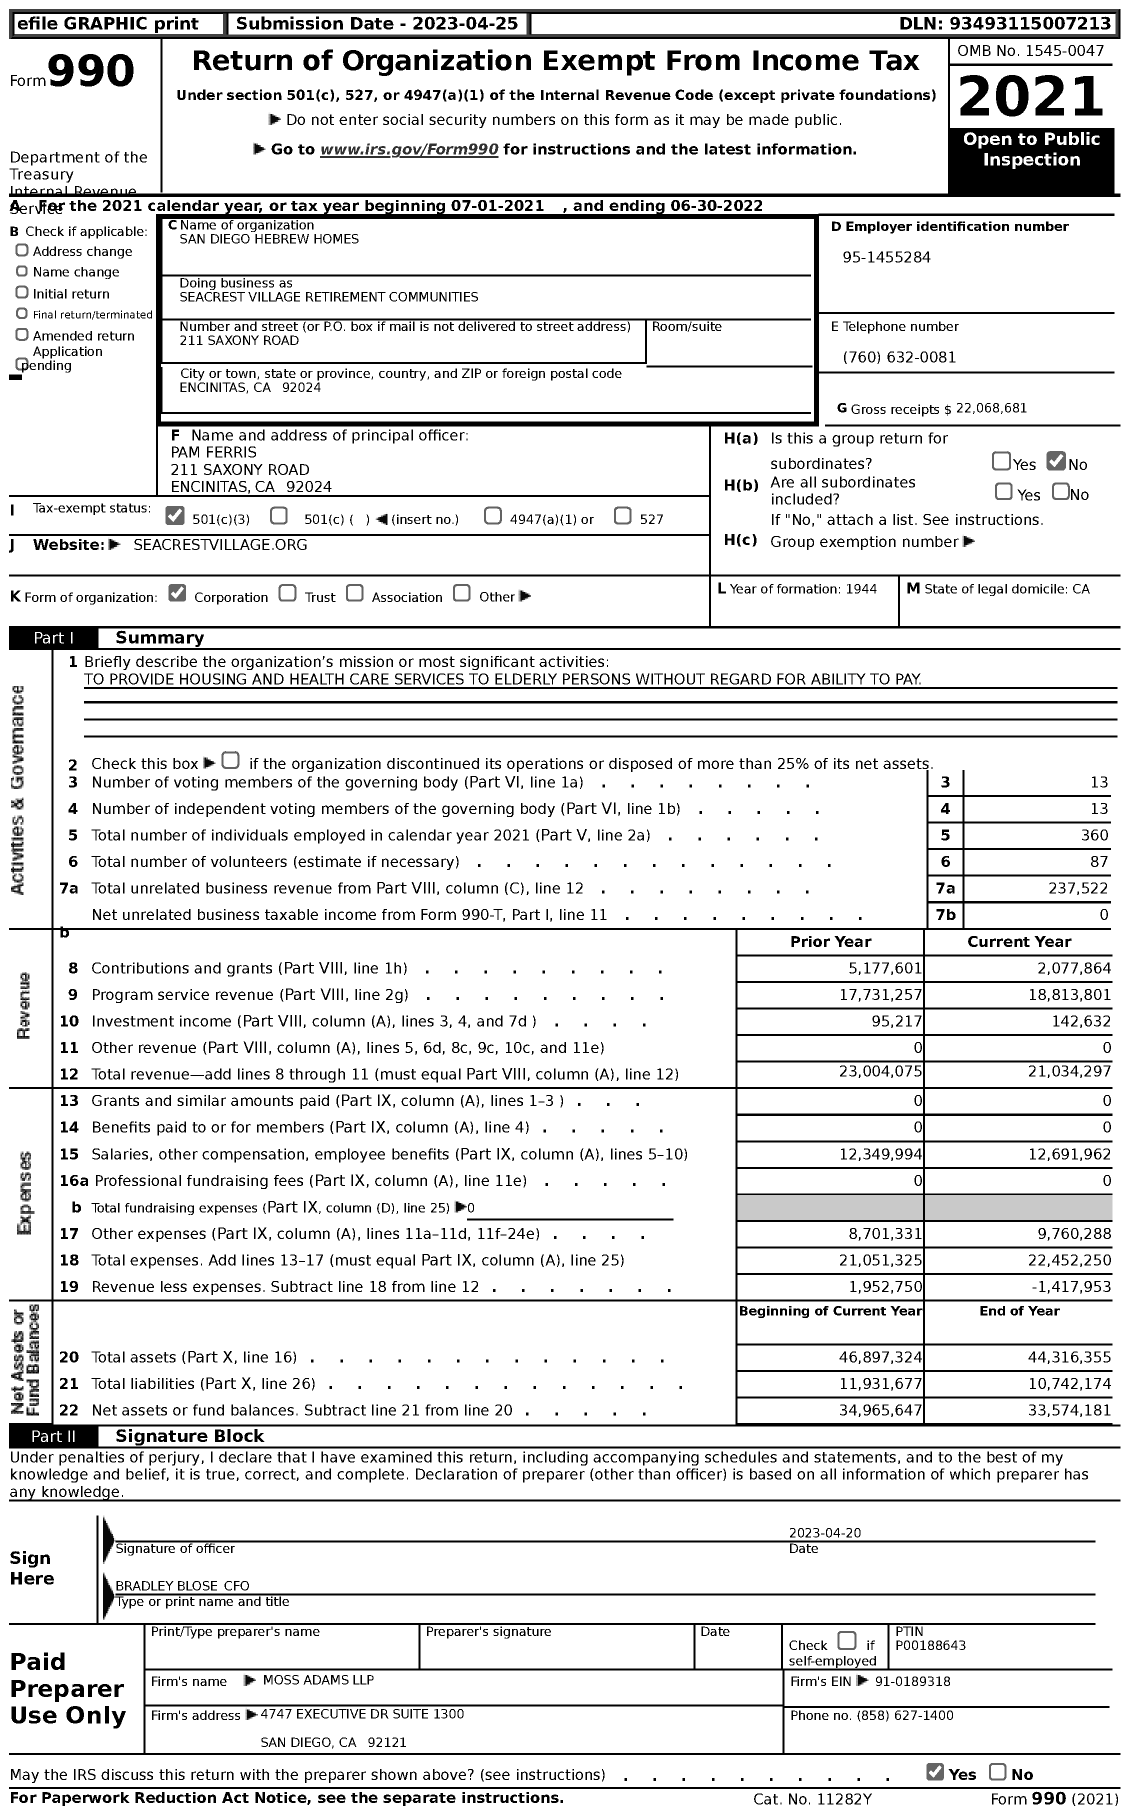 Image of first page of 2021 Form 990 for Seacrest Village Retirement Communities / San Diego Hebrew Homes